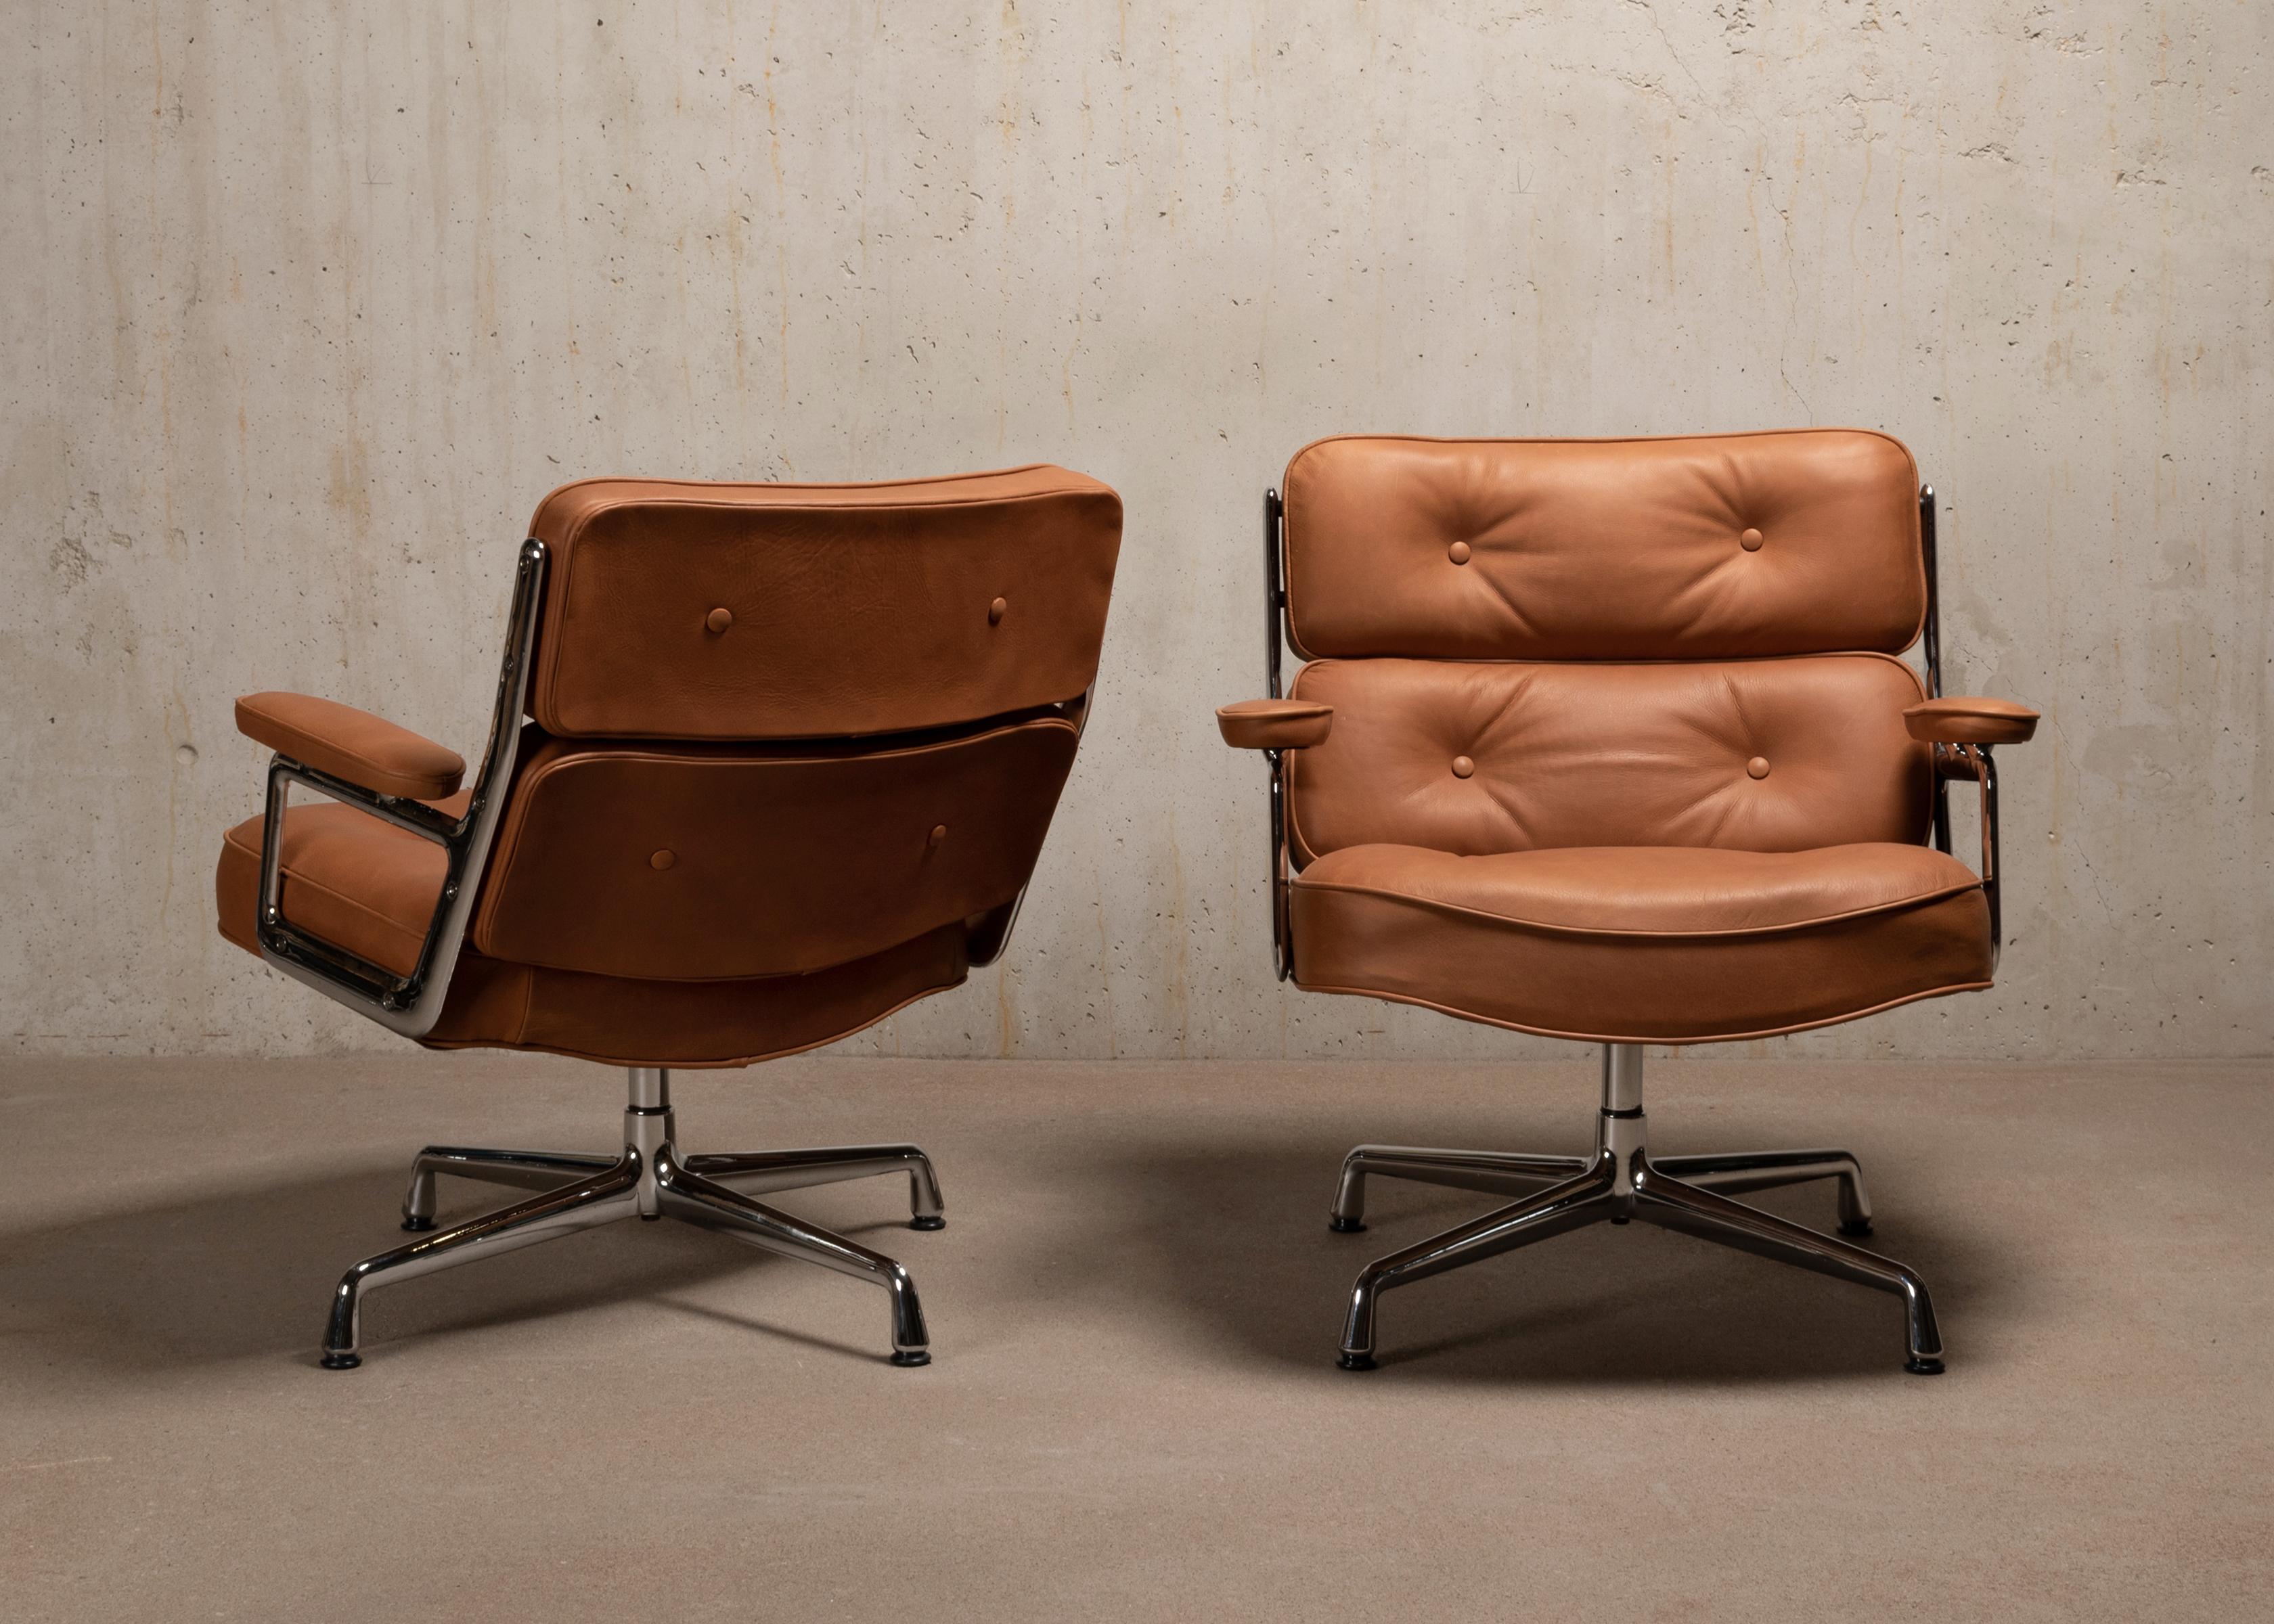 Iconic lounge chairs designed by Charles & Ray Eames for the lobbies in Time & Life Building, Manhattan NY. These chairs are manufactured by Vitra in 1991. Chrome plated aluminum frame with comfortable cushions recently upholstered in cognac